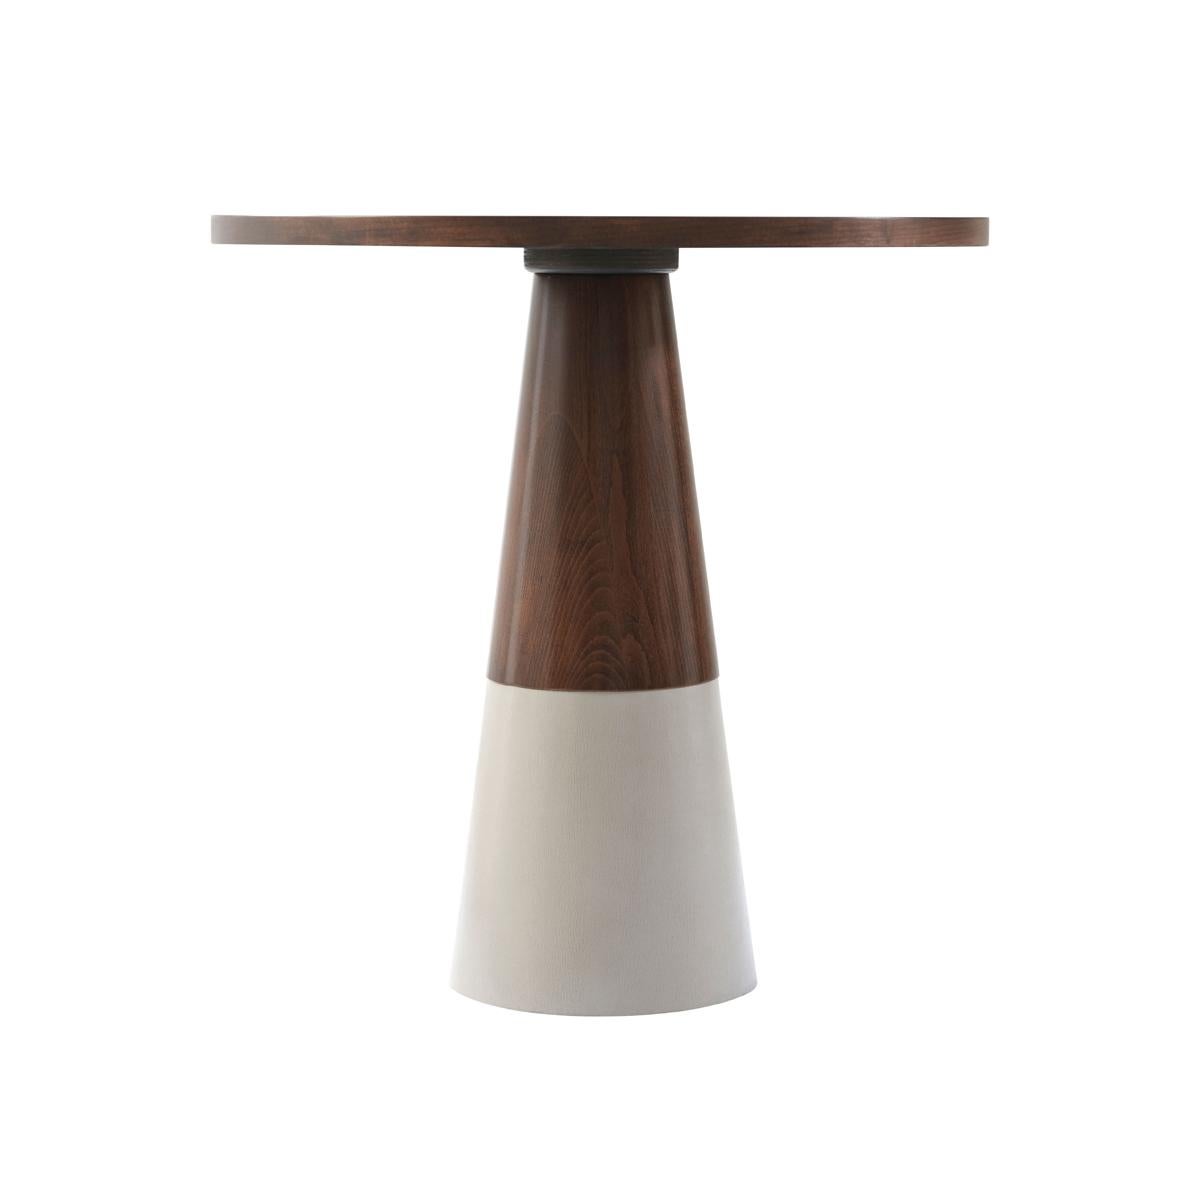 In a light almond finish to the starburst cherry veneered top with a central metal inlaid decorative disc. Raised on a tapered column pedestal wrapped in a grey leather detail.

Dimensions: 20